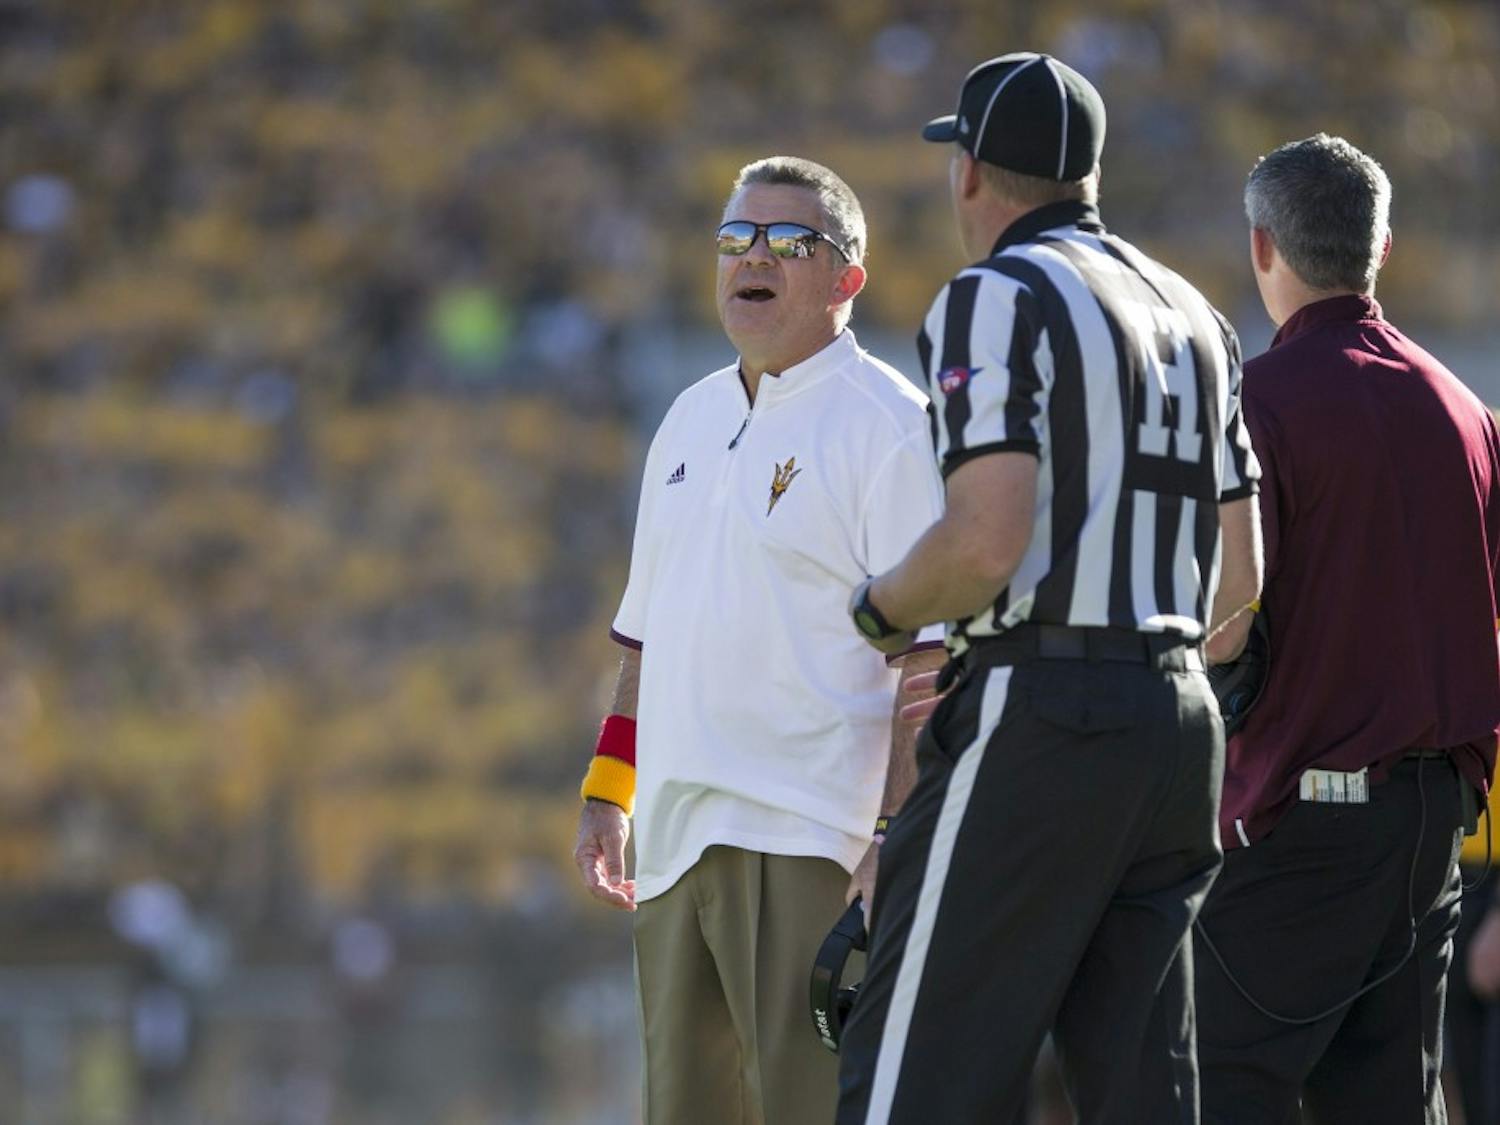 ASU head coach Todd Graham calls a timeout during a game at Sun Devil Stadium in Tempe, Ariz., on Saturday, Nov. 21, 2015. The ASU Sun Devils led the UA Wildcats 31-10 at halftime. 